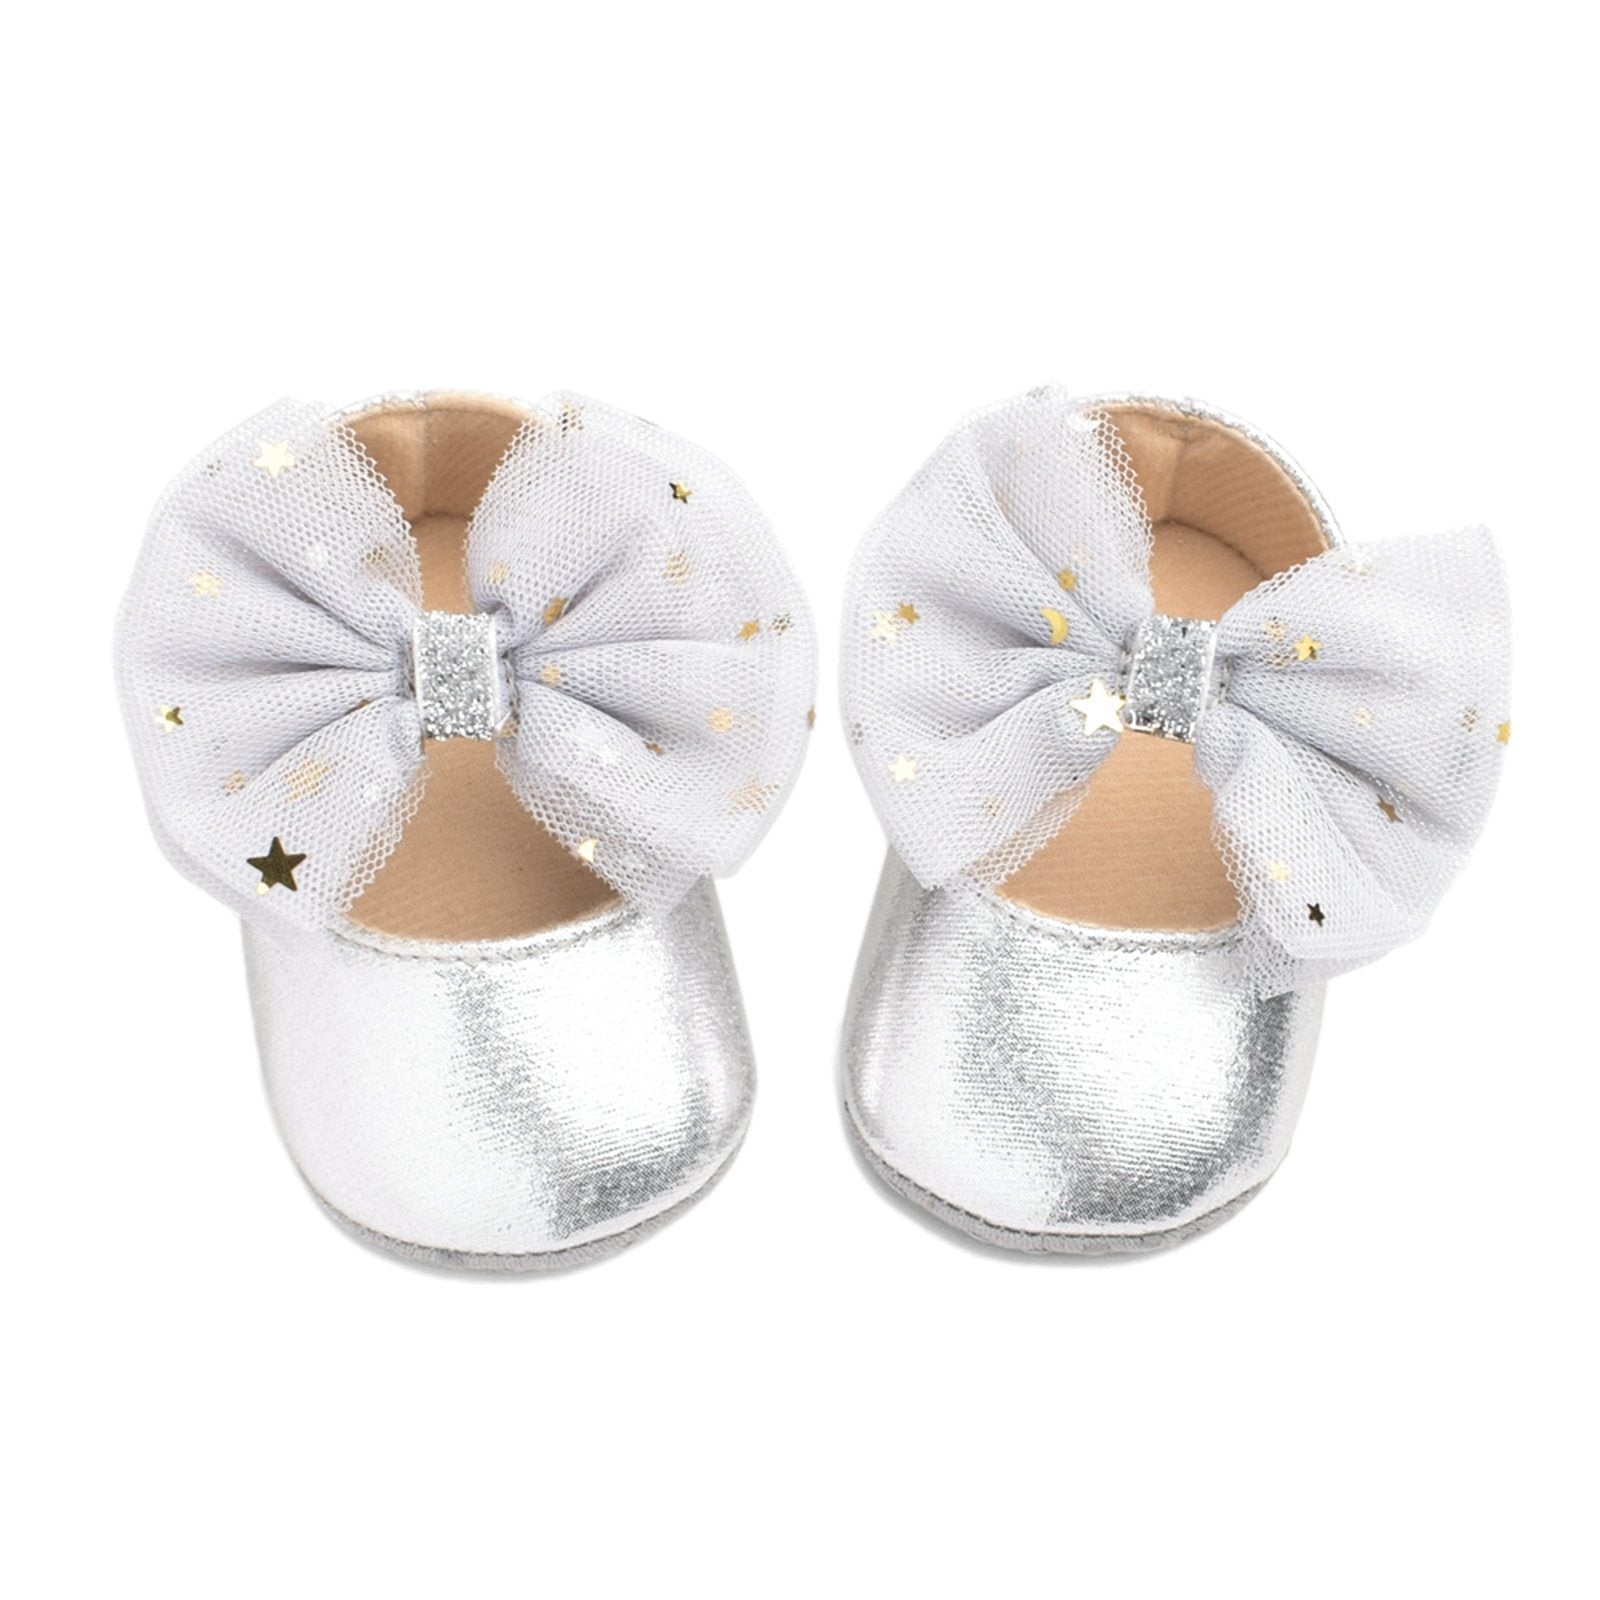 Glitter Star Shoes (Multiple Colors)